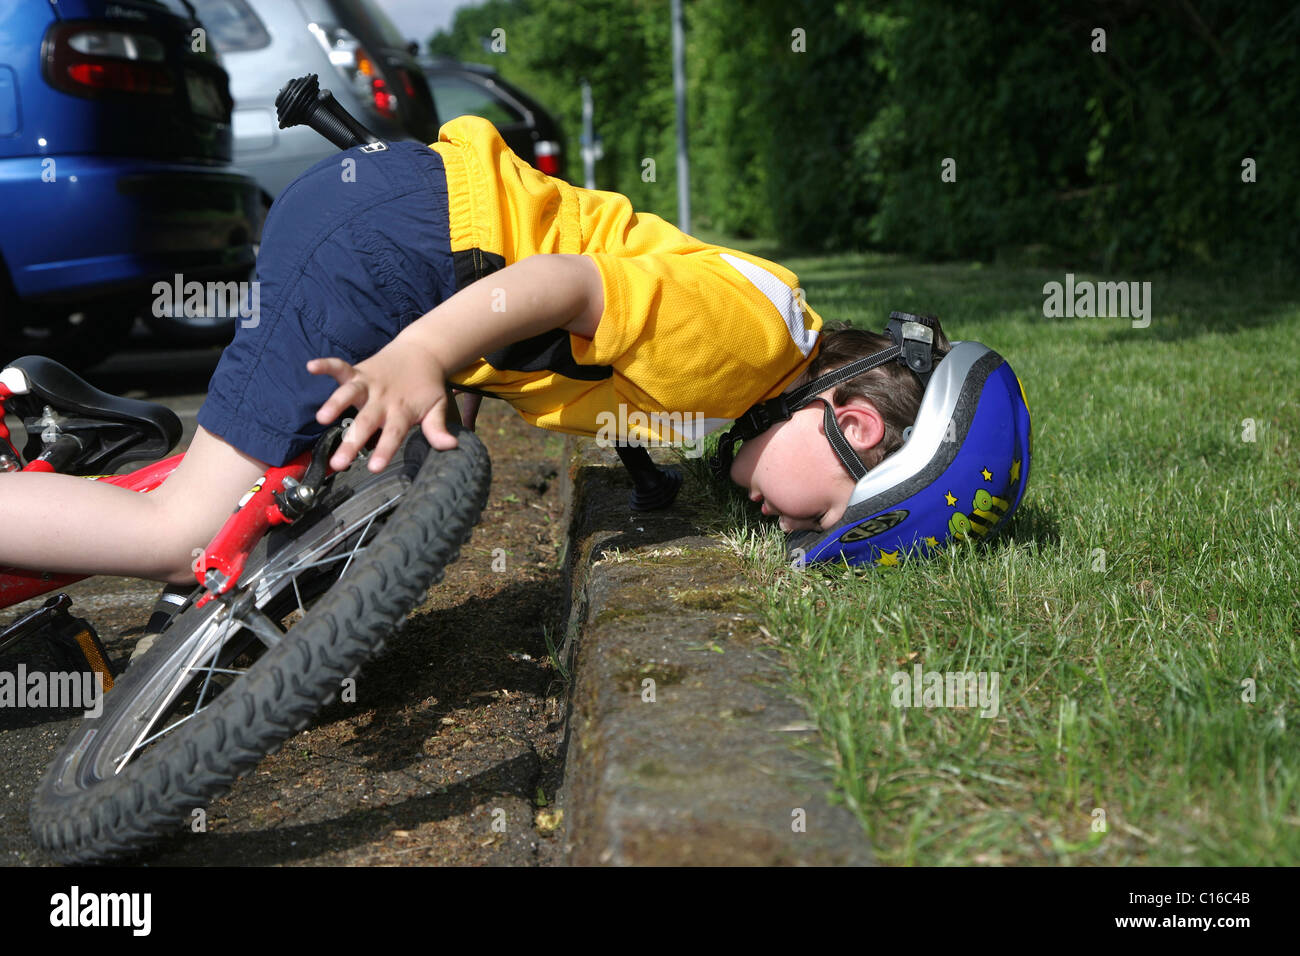 Five-year-old boy wearing a bicycle helmet falling off his bicycle, posed photo Stock Photo